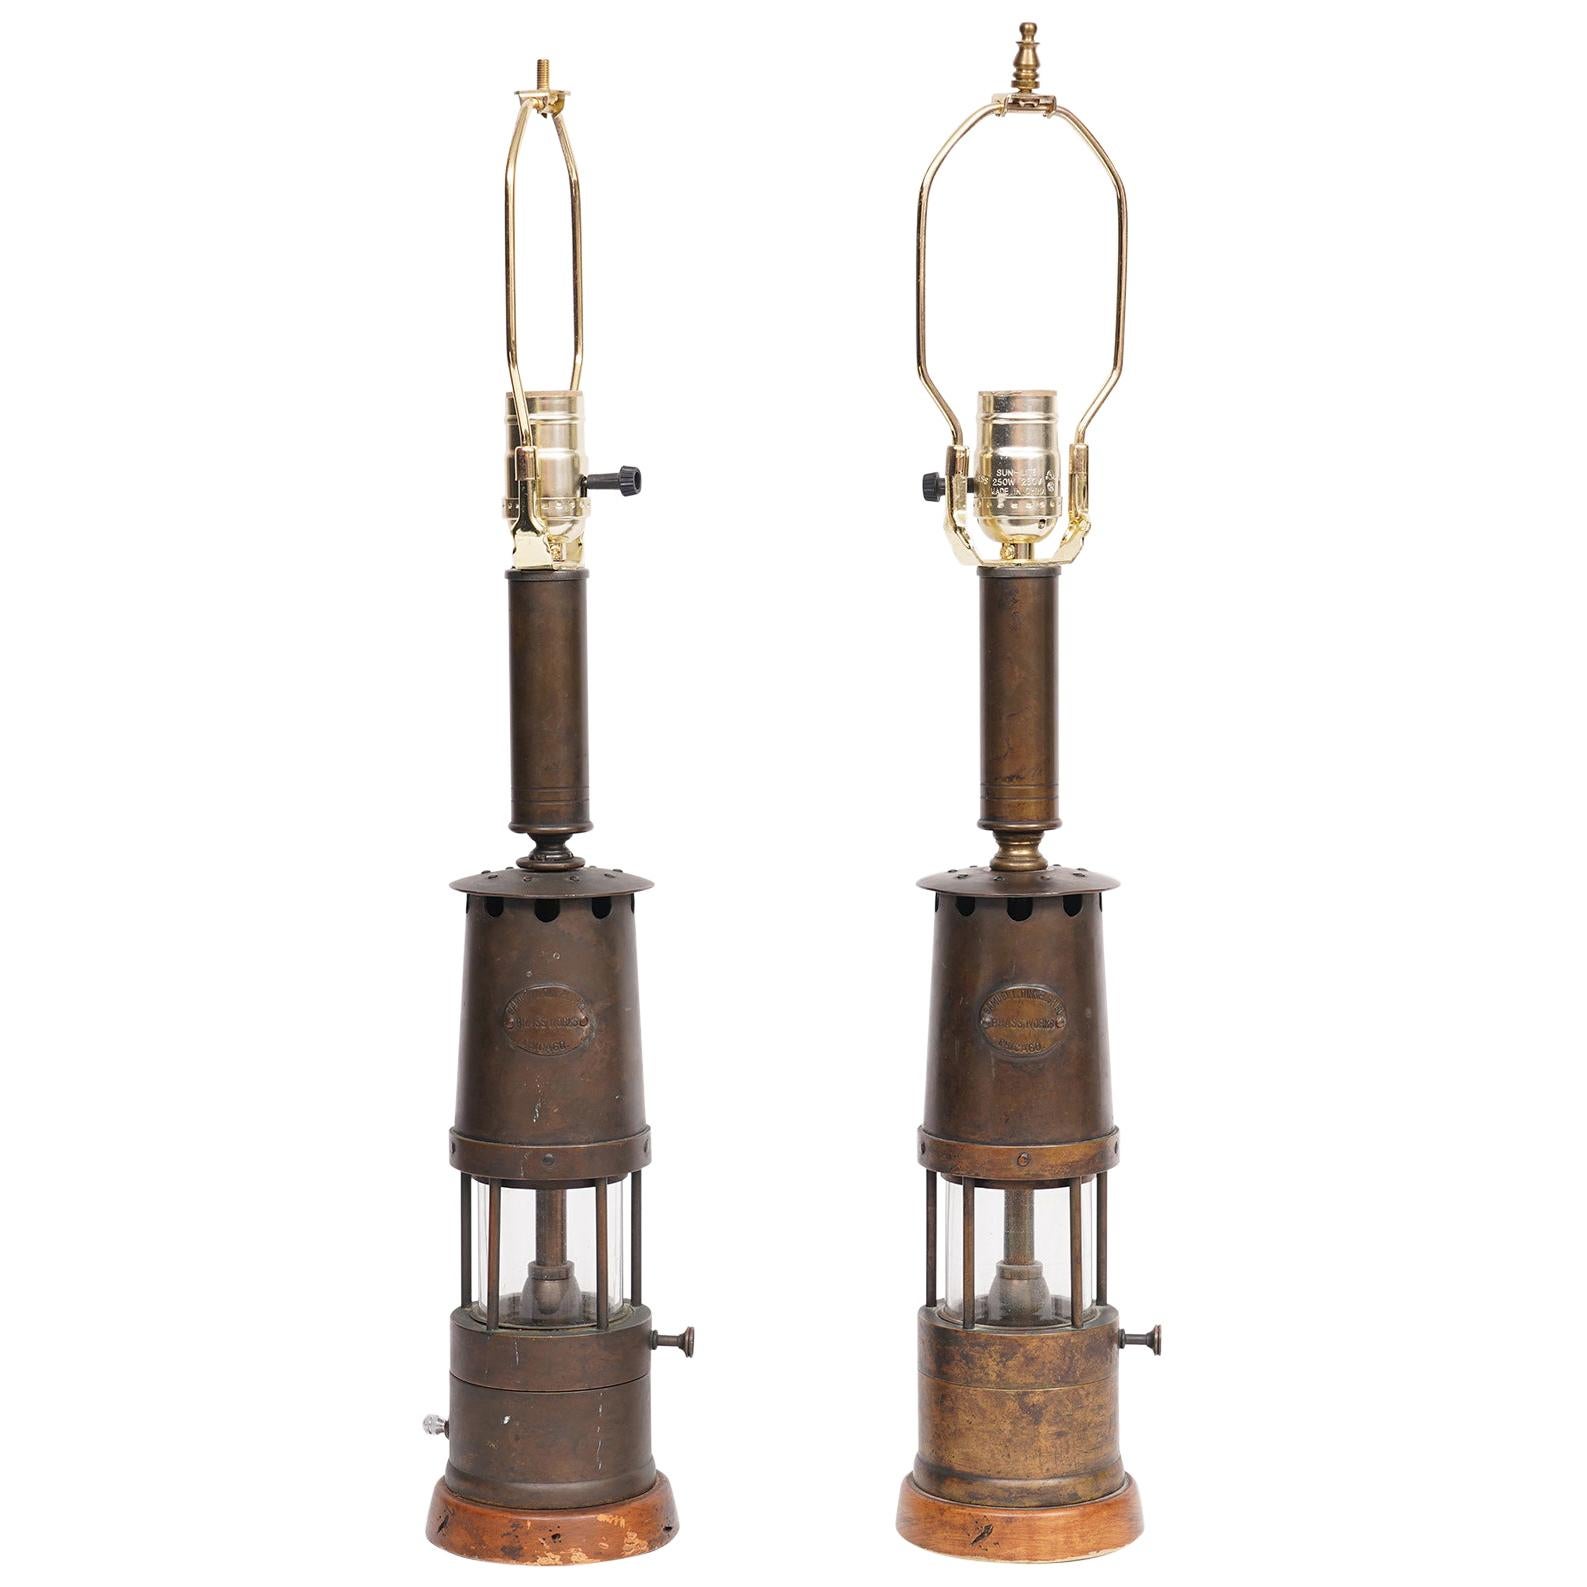 Pair of Industrial Miner's Lanterns Marked Dinkelspiel Converted to Table Lamps